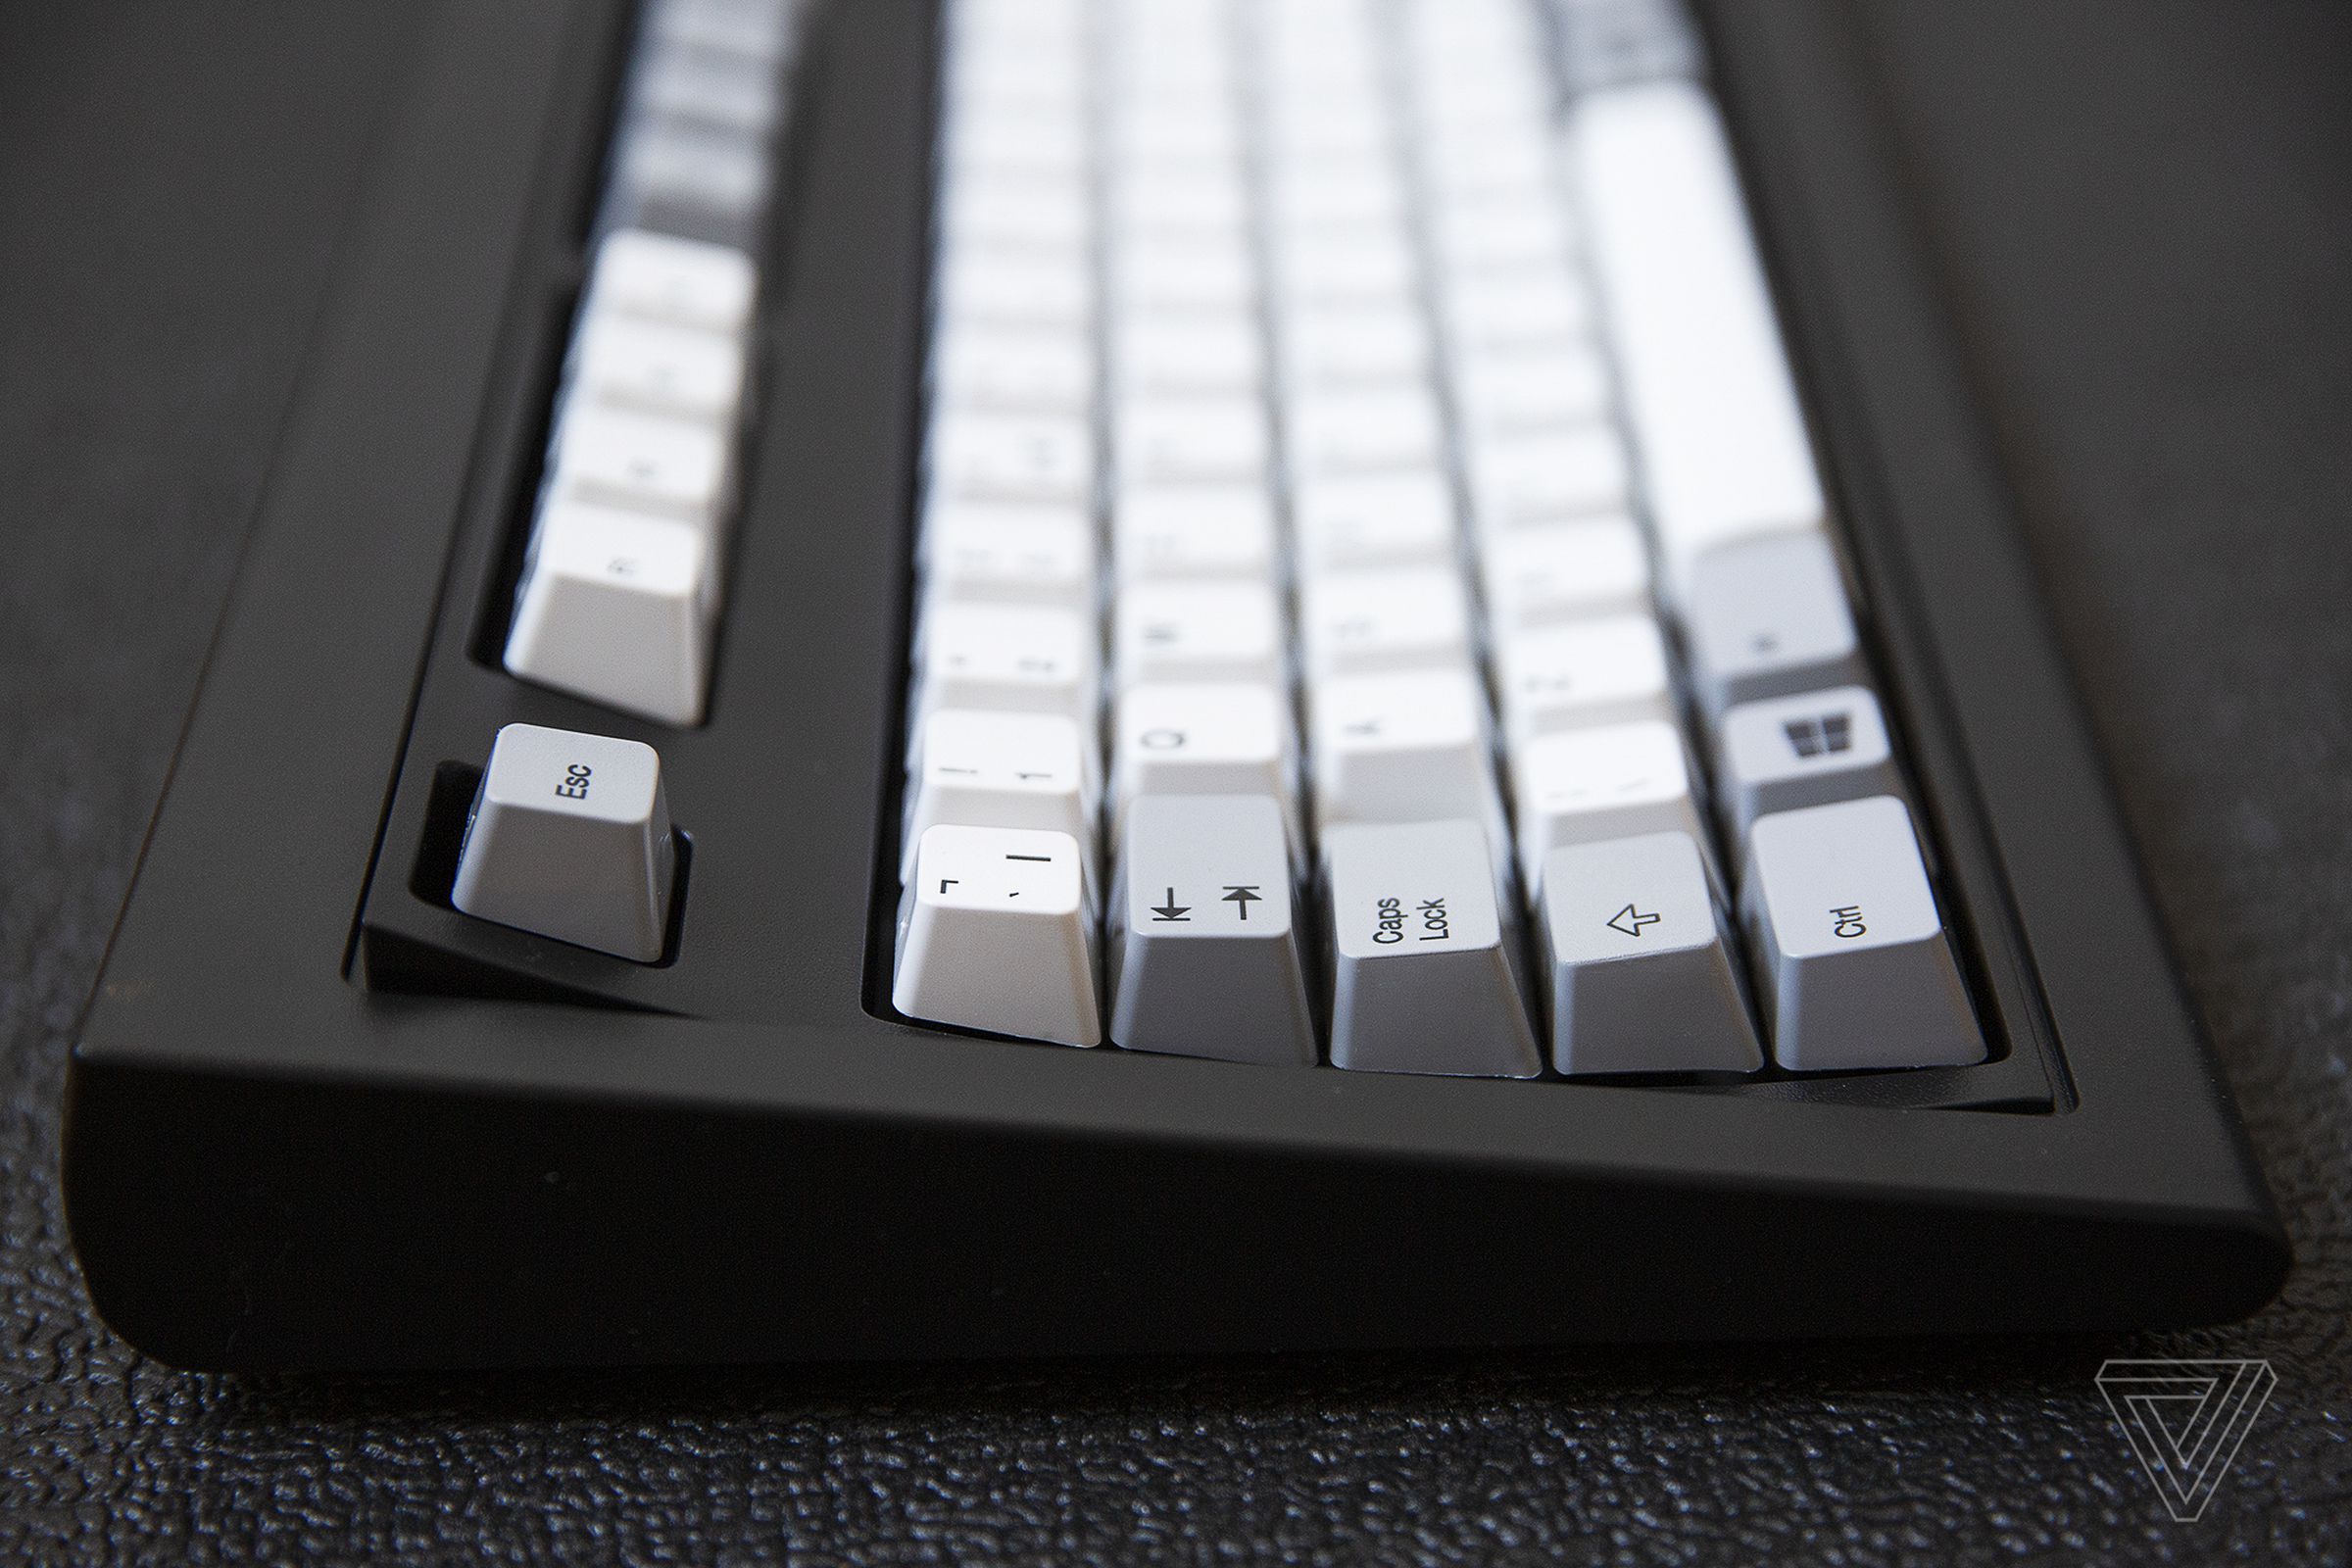 Its keycaps are made of PBT plastic and have a slightly rough texture to them.